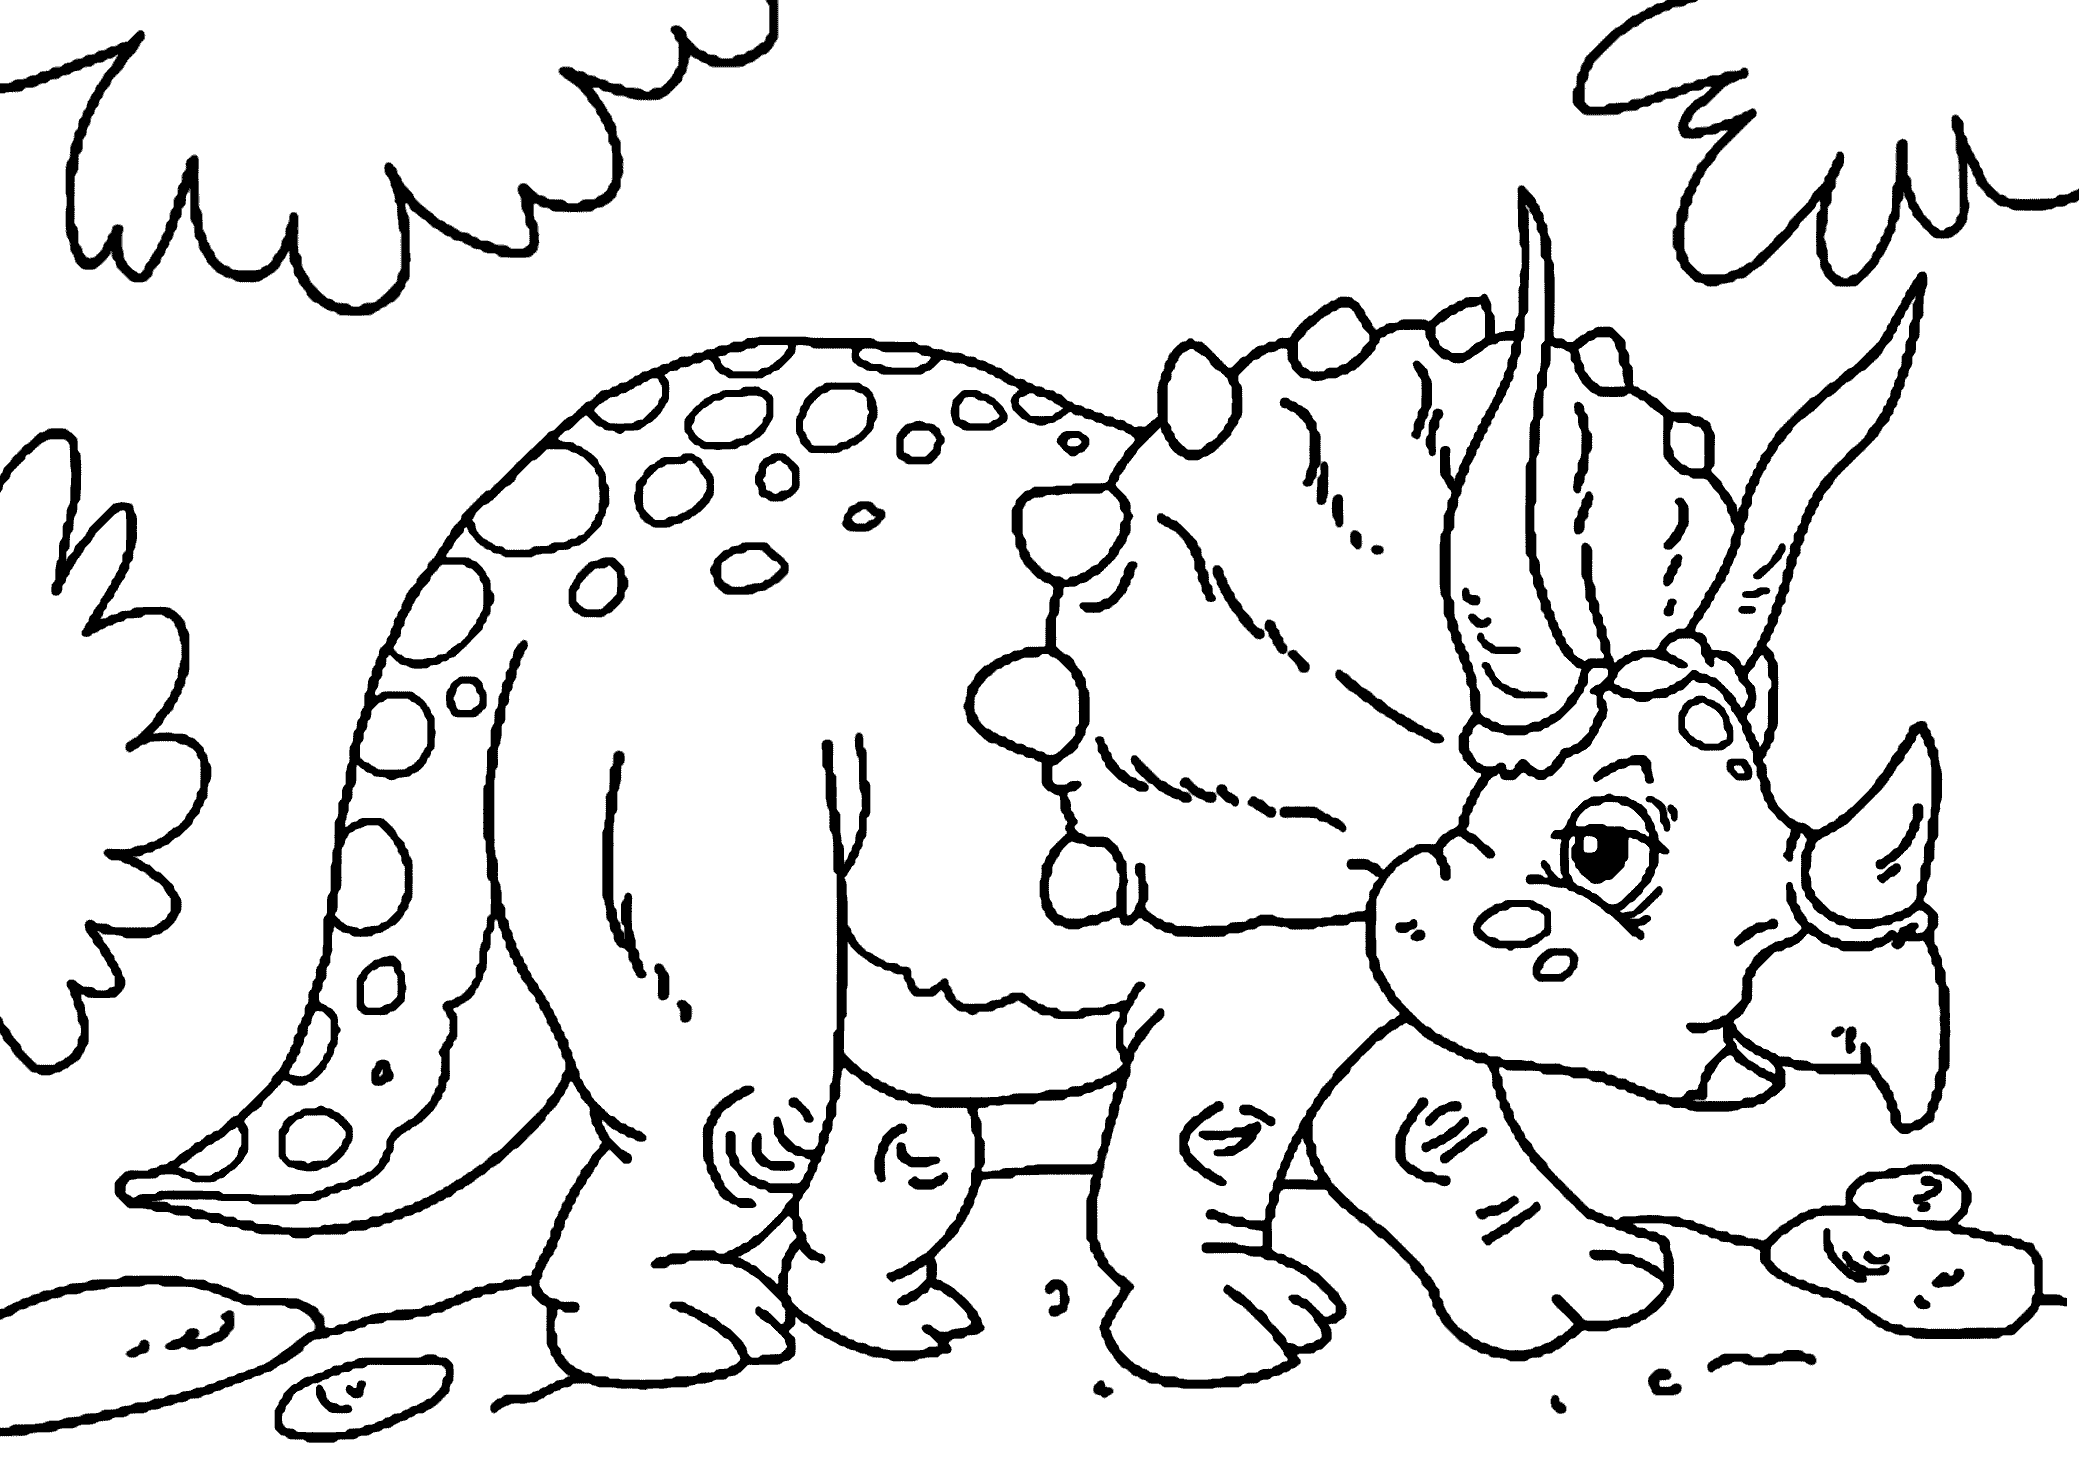 dinosaur coloring pages for toddlers top 35 free printable unique dinosaur coloring pages coloring toddlers for pages dinosaur 